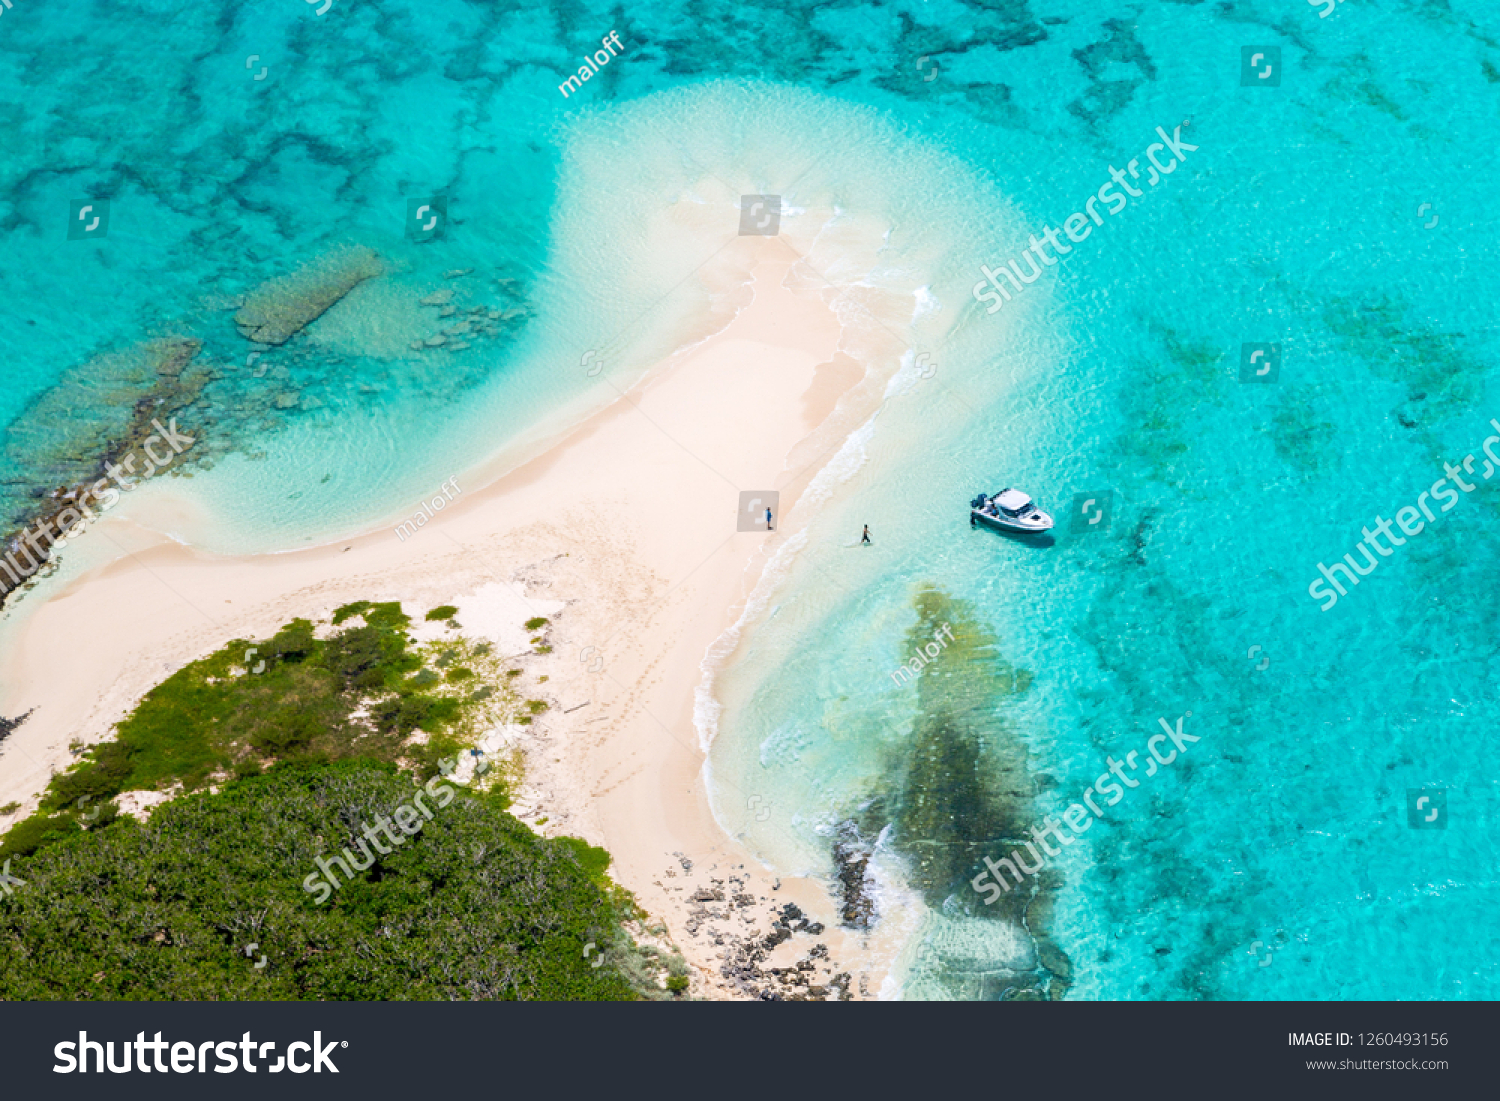 Tourists, divers, snorkelers, jet boat, an idyllic empty sandy beach of remote island, azure turquoise blue lagoon, West Coast barrier reef, aerial view. New Caledonia, Melanesia, South Pacific Ocean. #1260493156